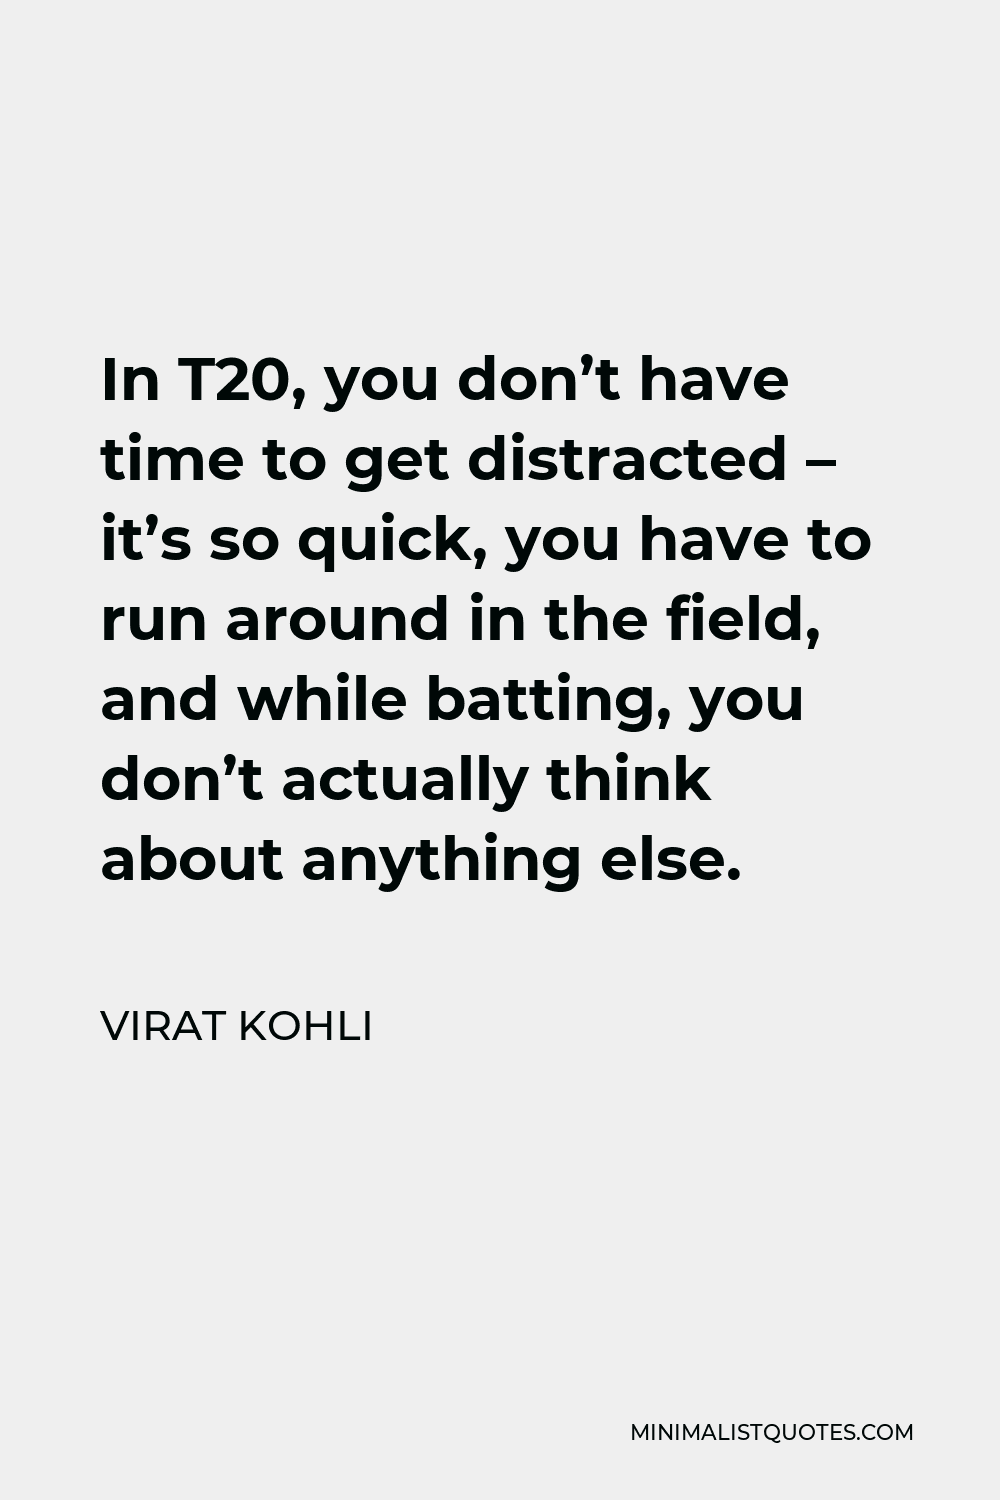 Virat Kohli Quote - In T20, you don’t have time to get distracted – it’s so quick, you have to run around in the field, and while batting, you don’t actually think about anything else.